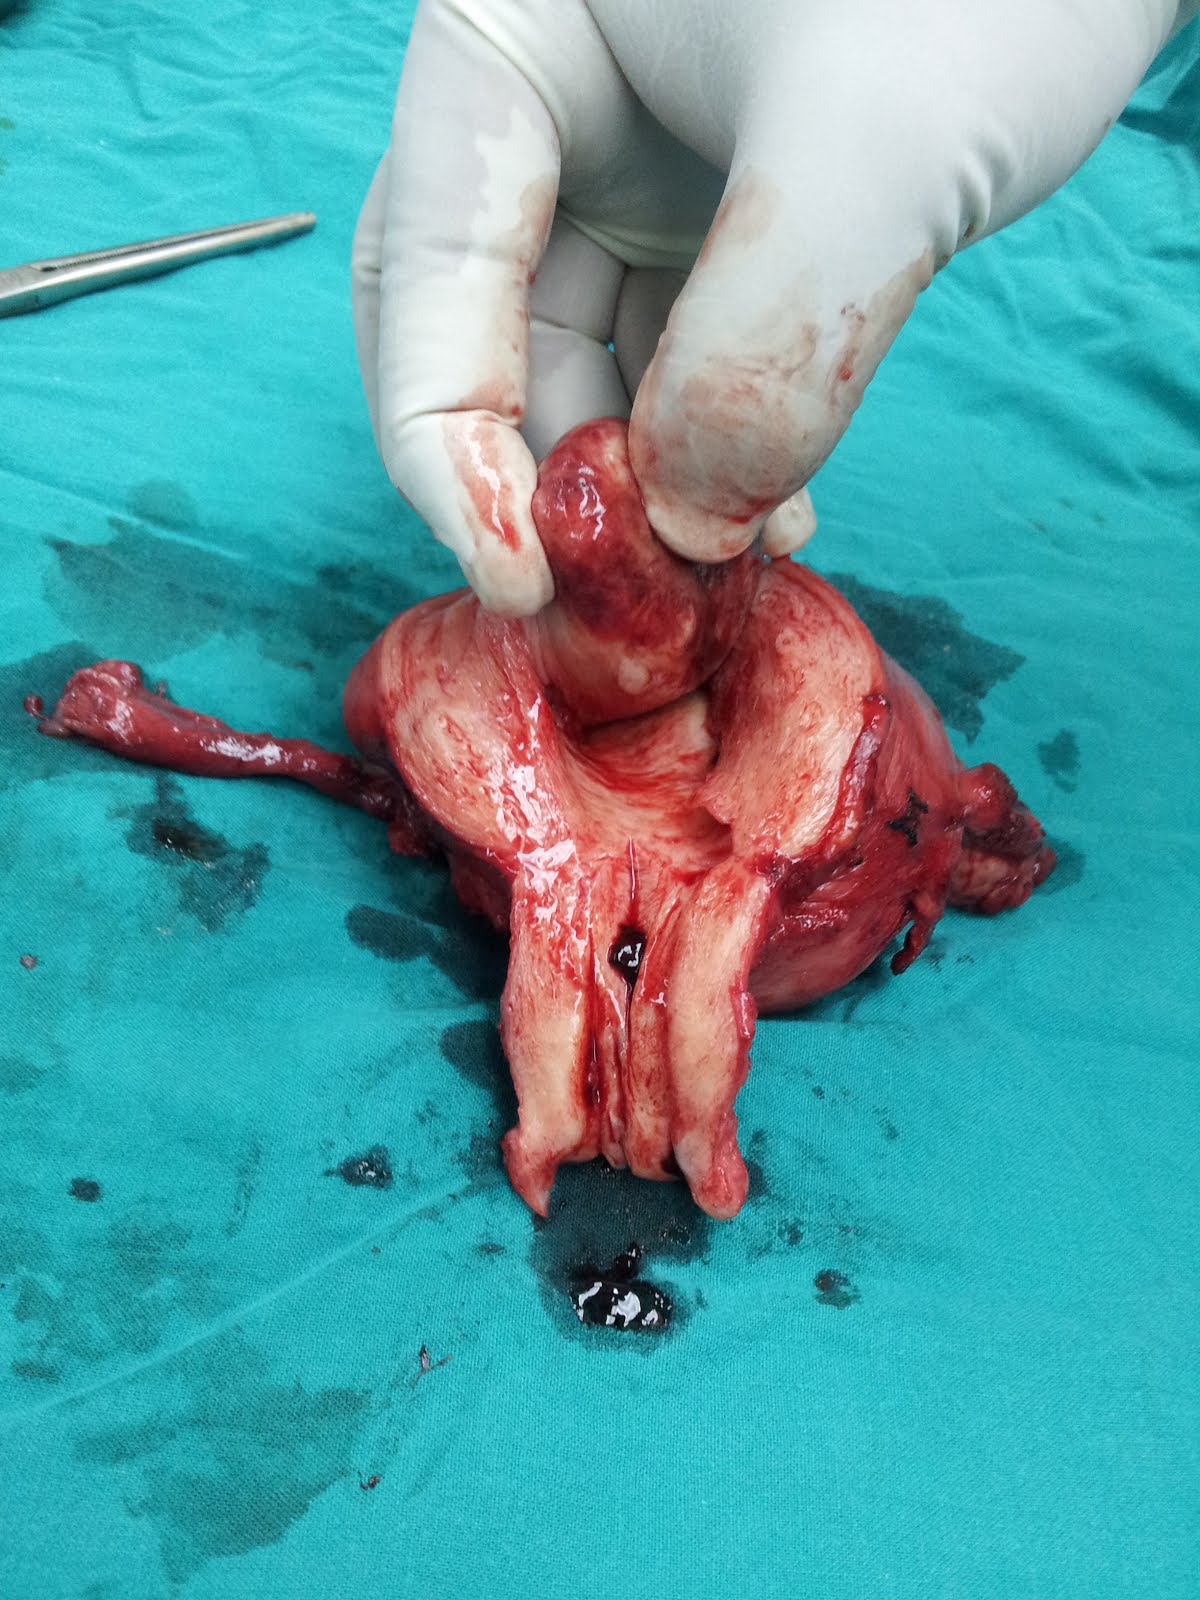 Hysterectomy for submucus fibroid. Done by Dr. Alaa Mosbah